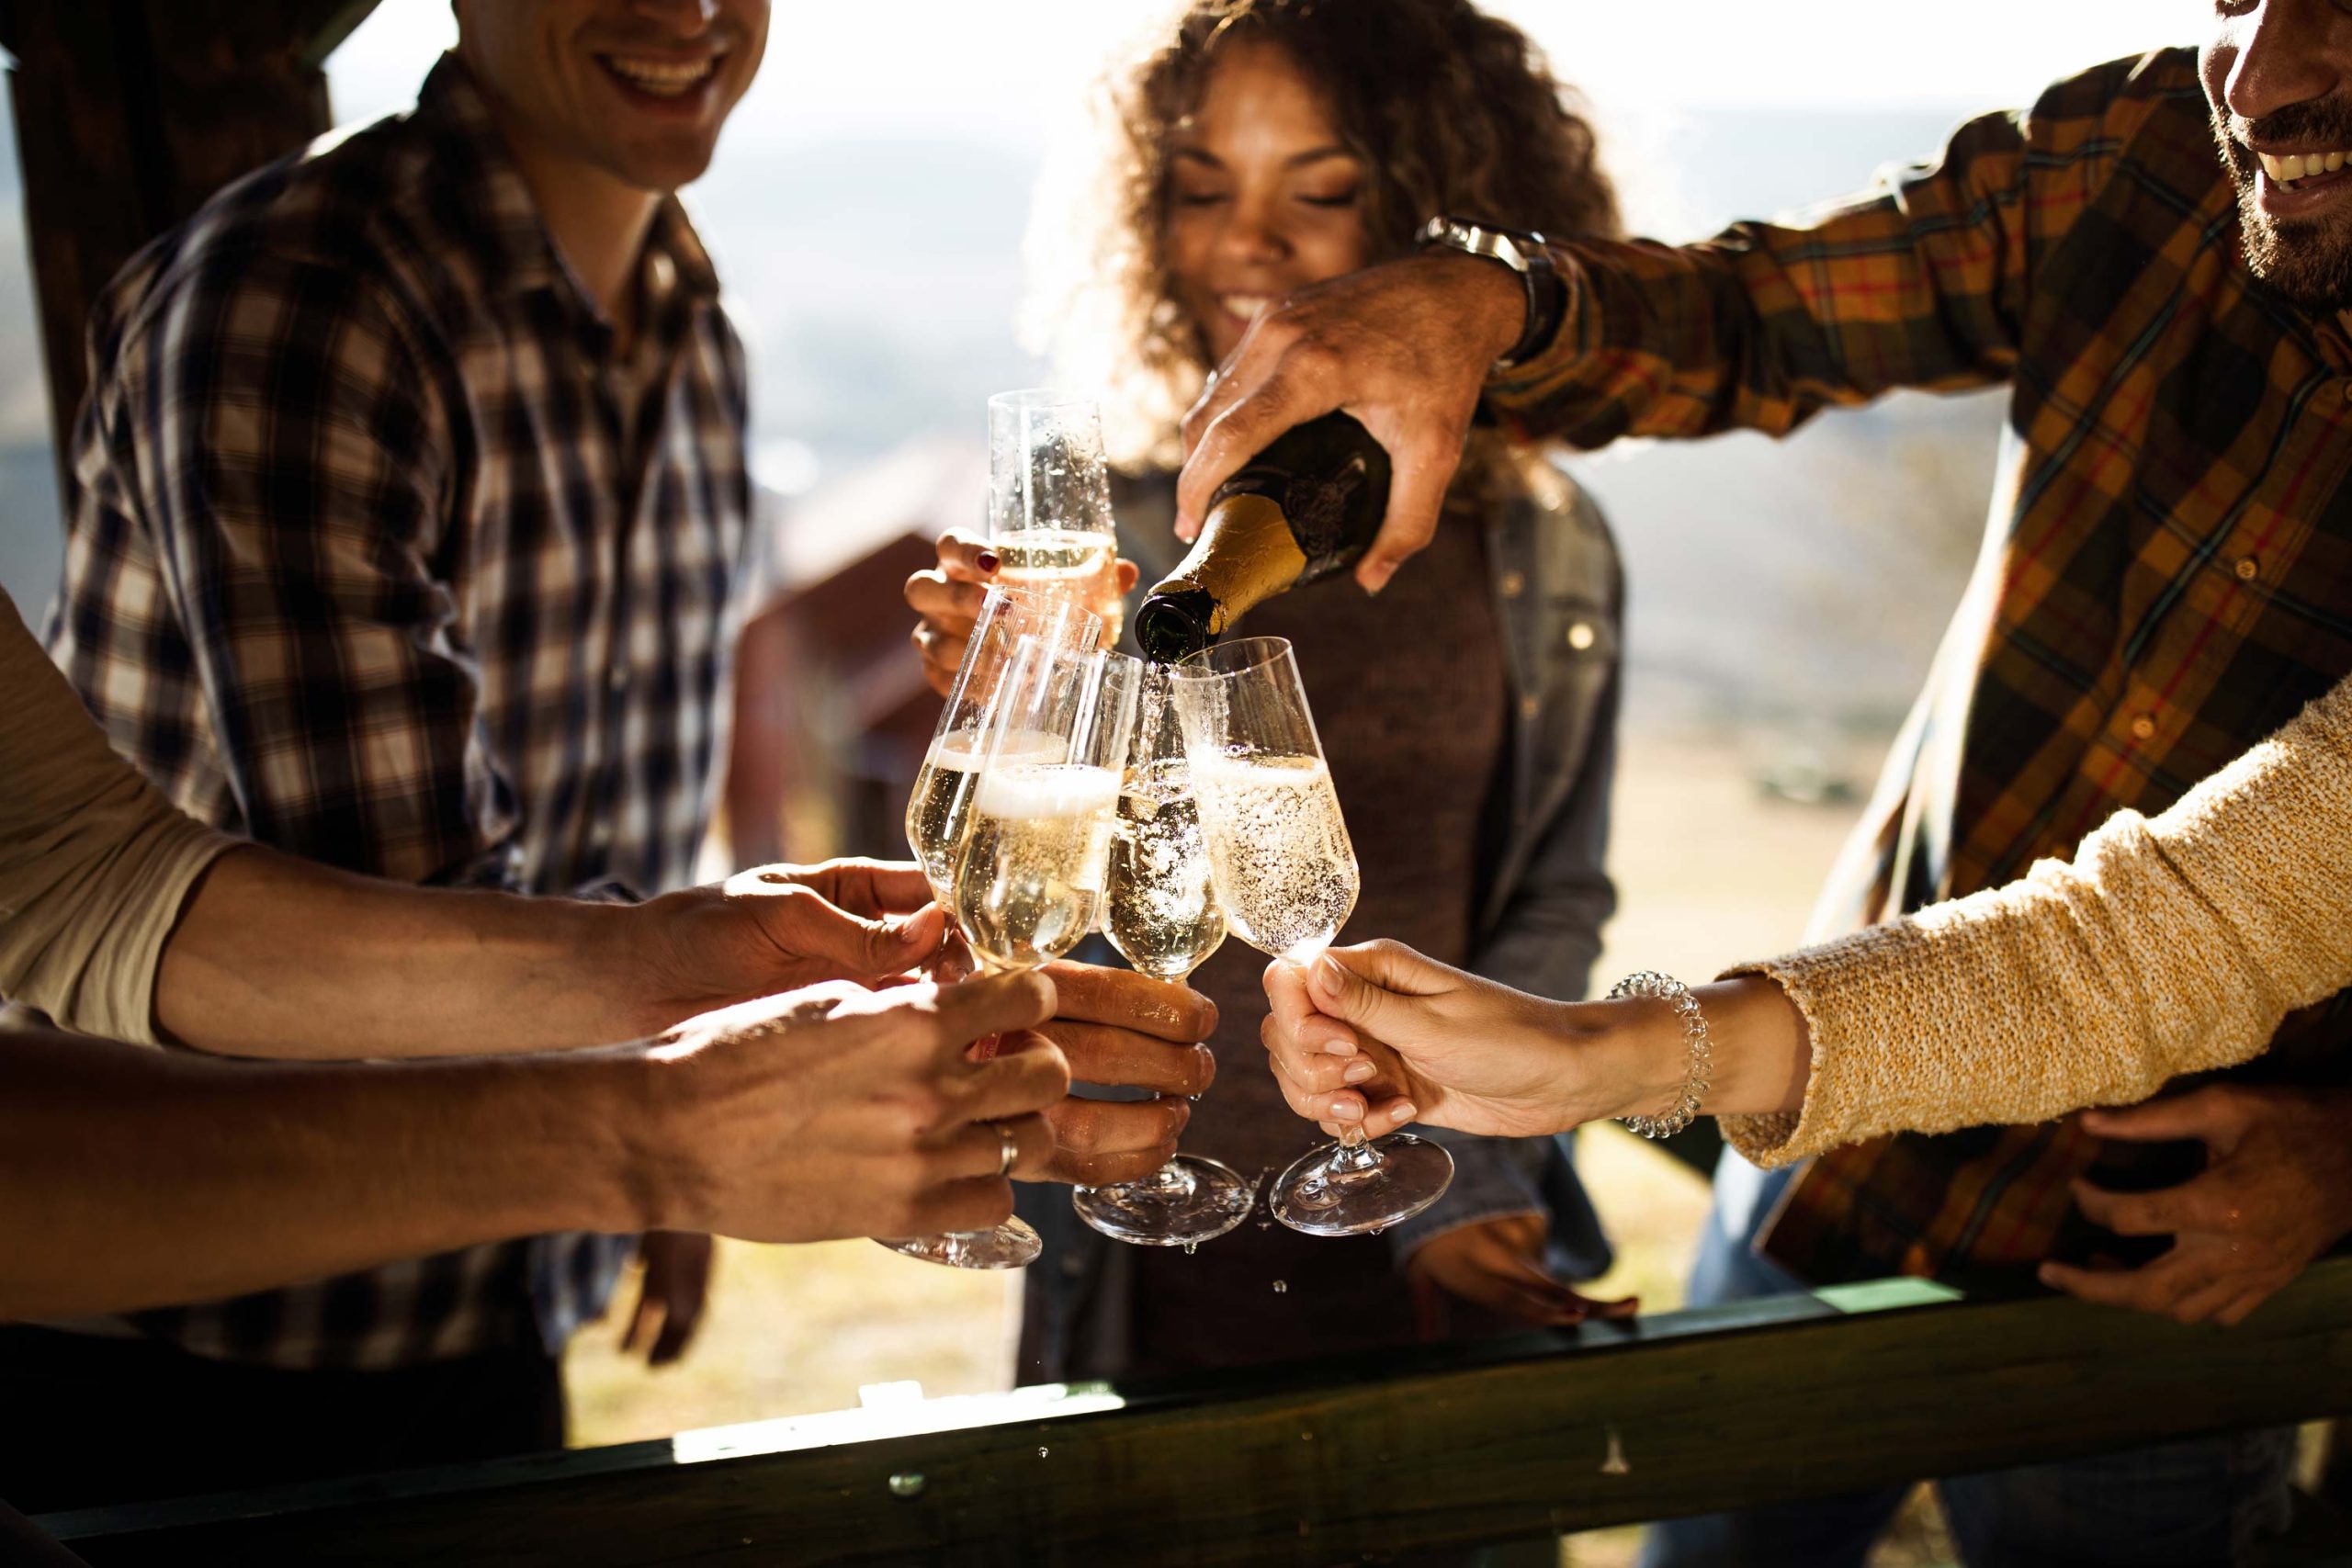 A group of friends enjoying some sparkling wine at a vineyard tour